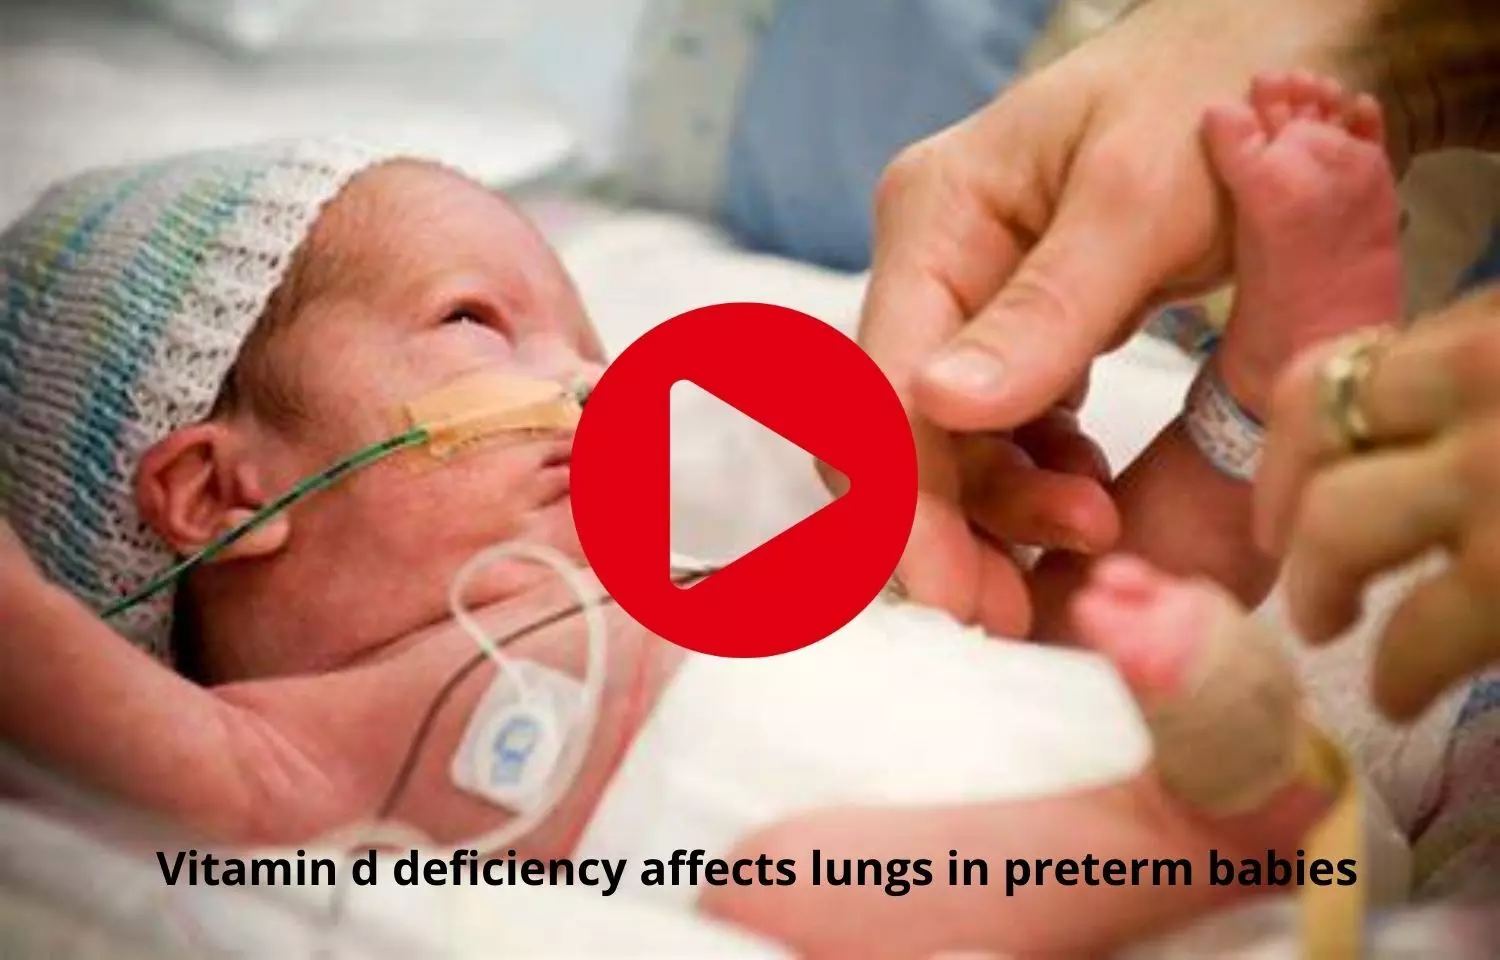 Vitamin d deficiency to affect lung deveopment in preterm babies